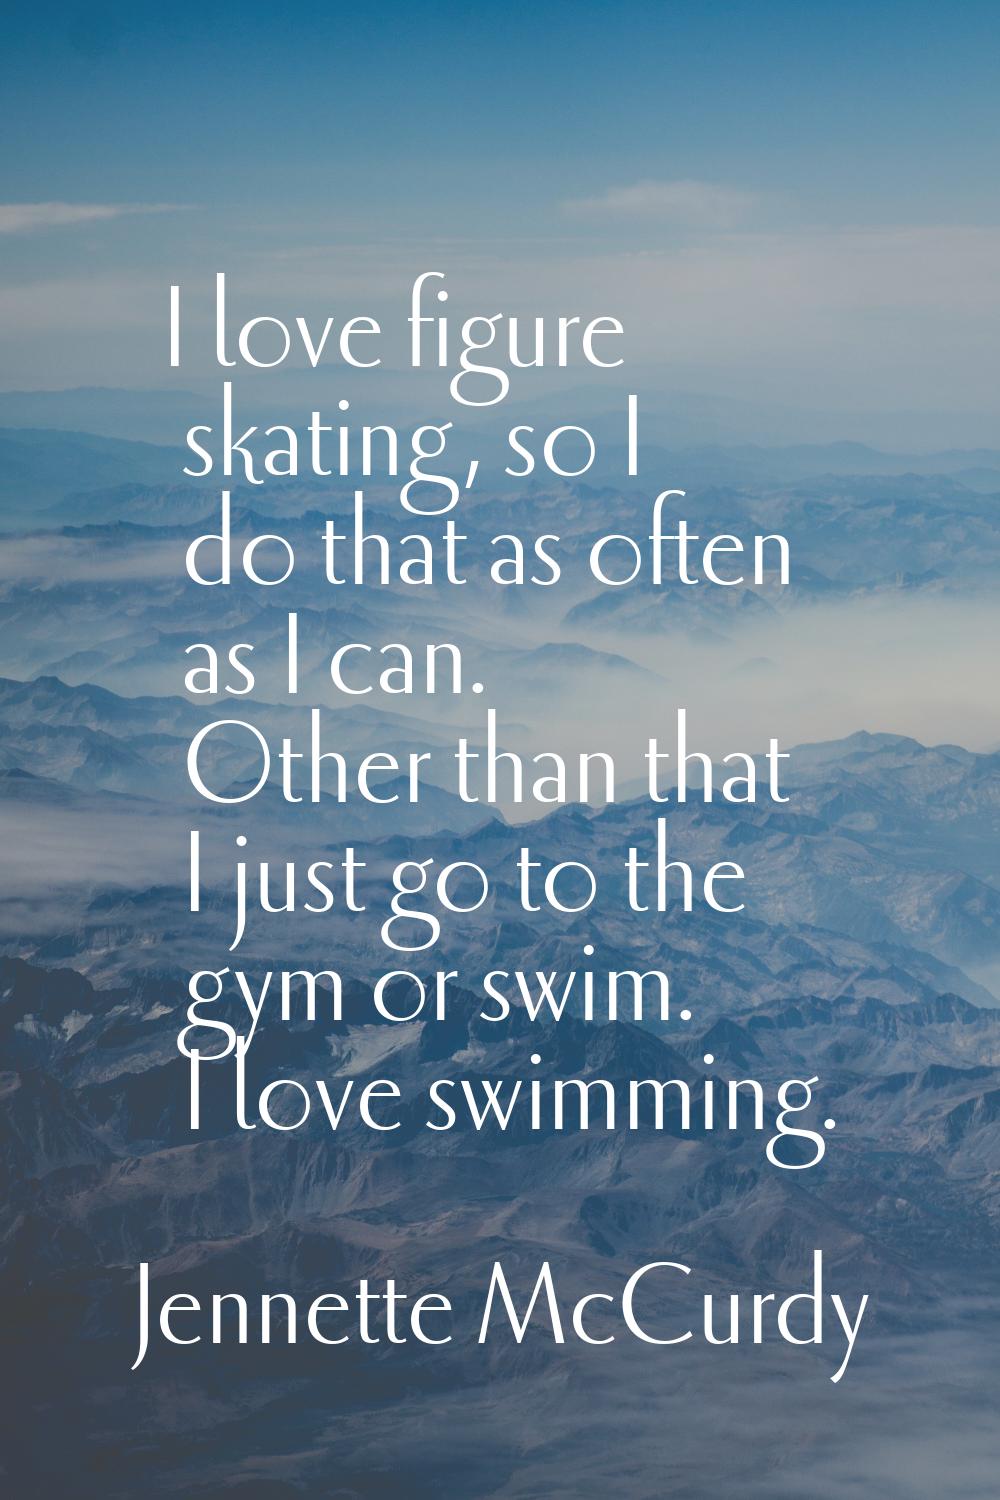 I love figure skating, so I do that as often as I can. Other than that I just go to the gym or swim